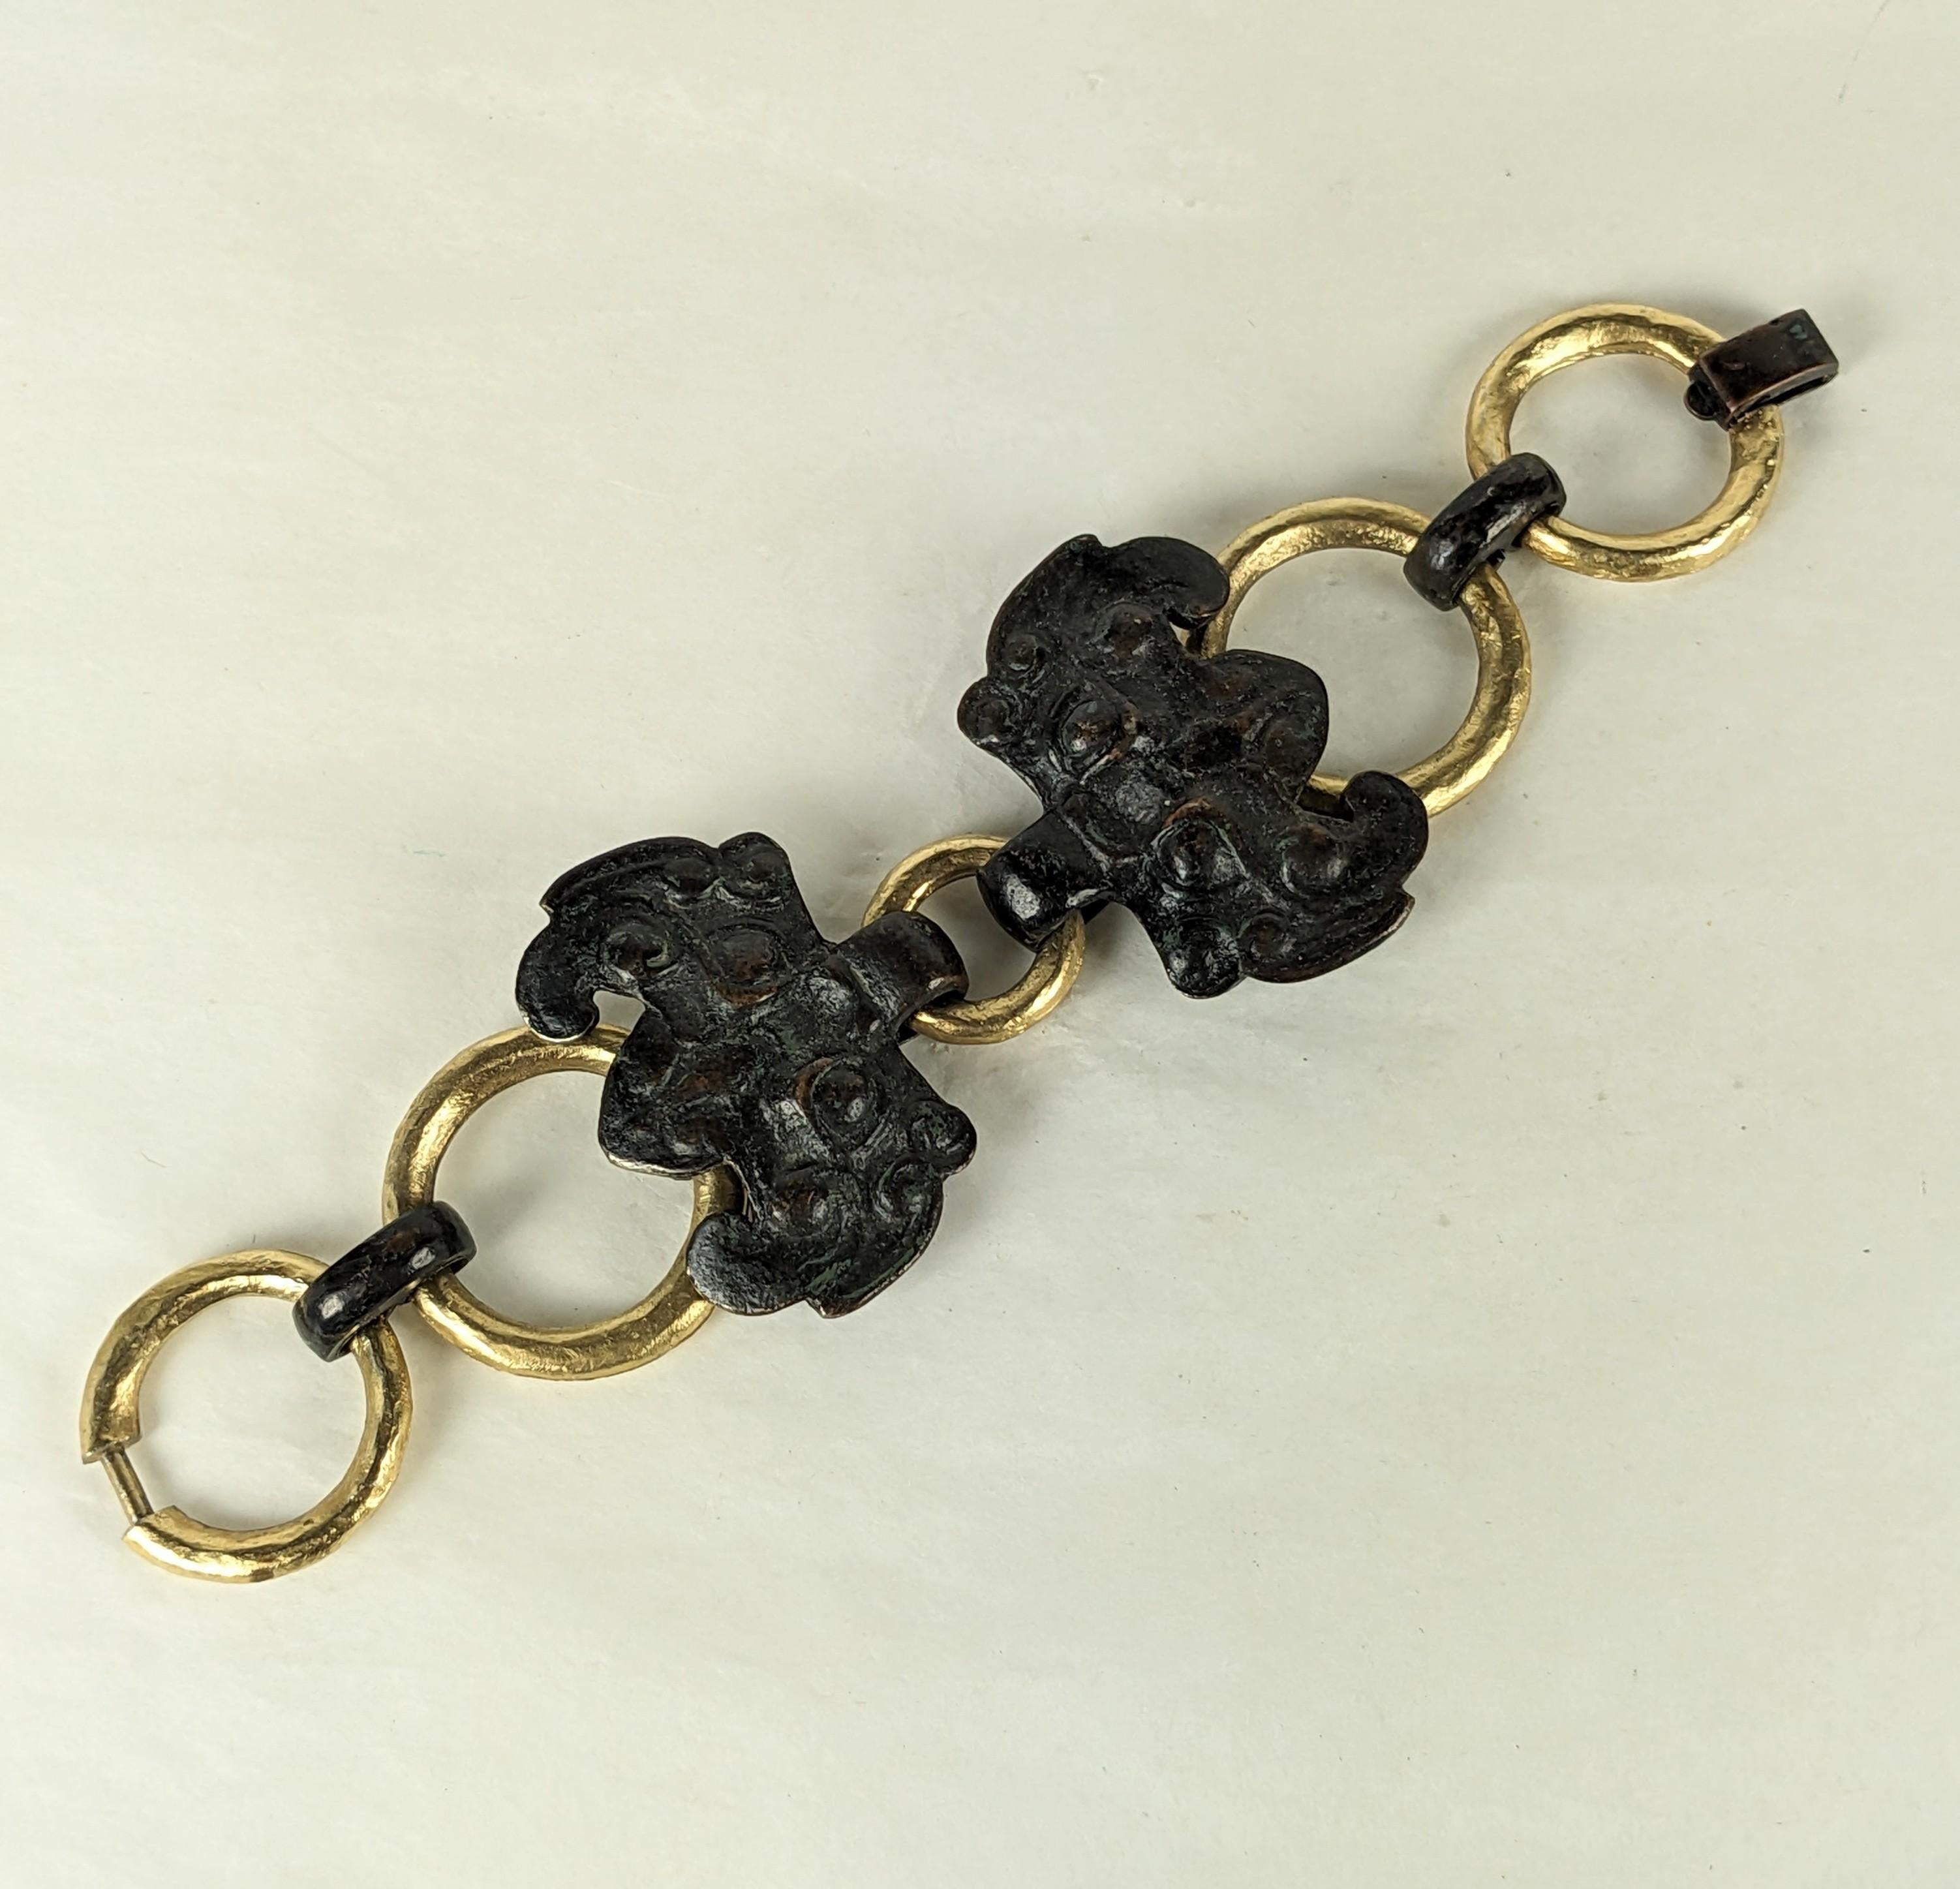 Diane Love for Trifari Ancient Chinese Motif Bracelet with patinaed bronze finish bats and hammered gold links. 7